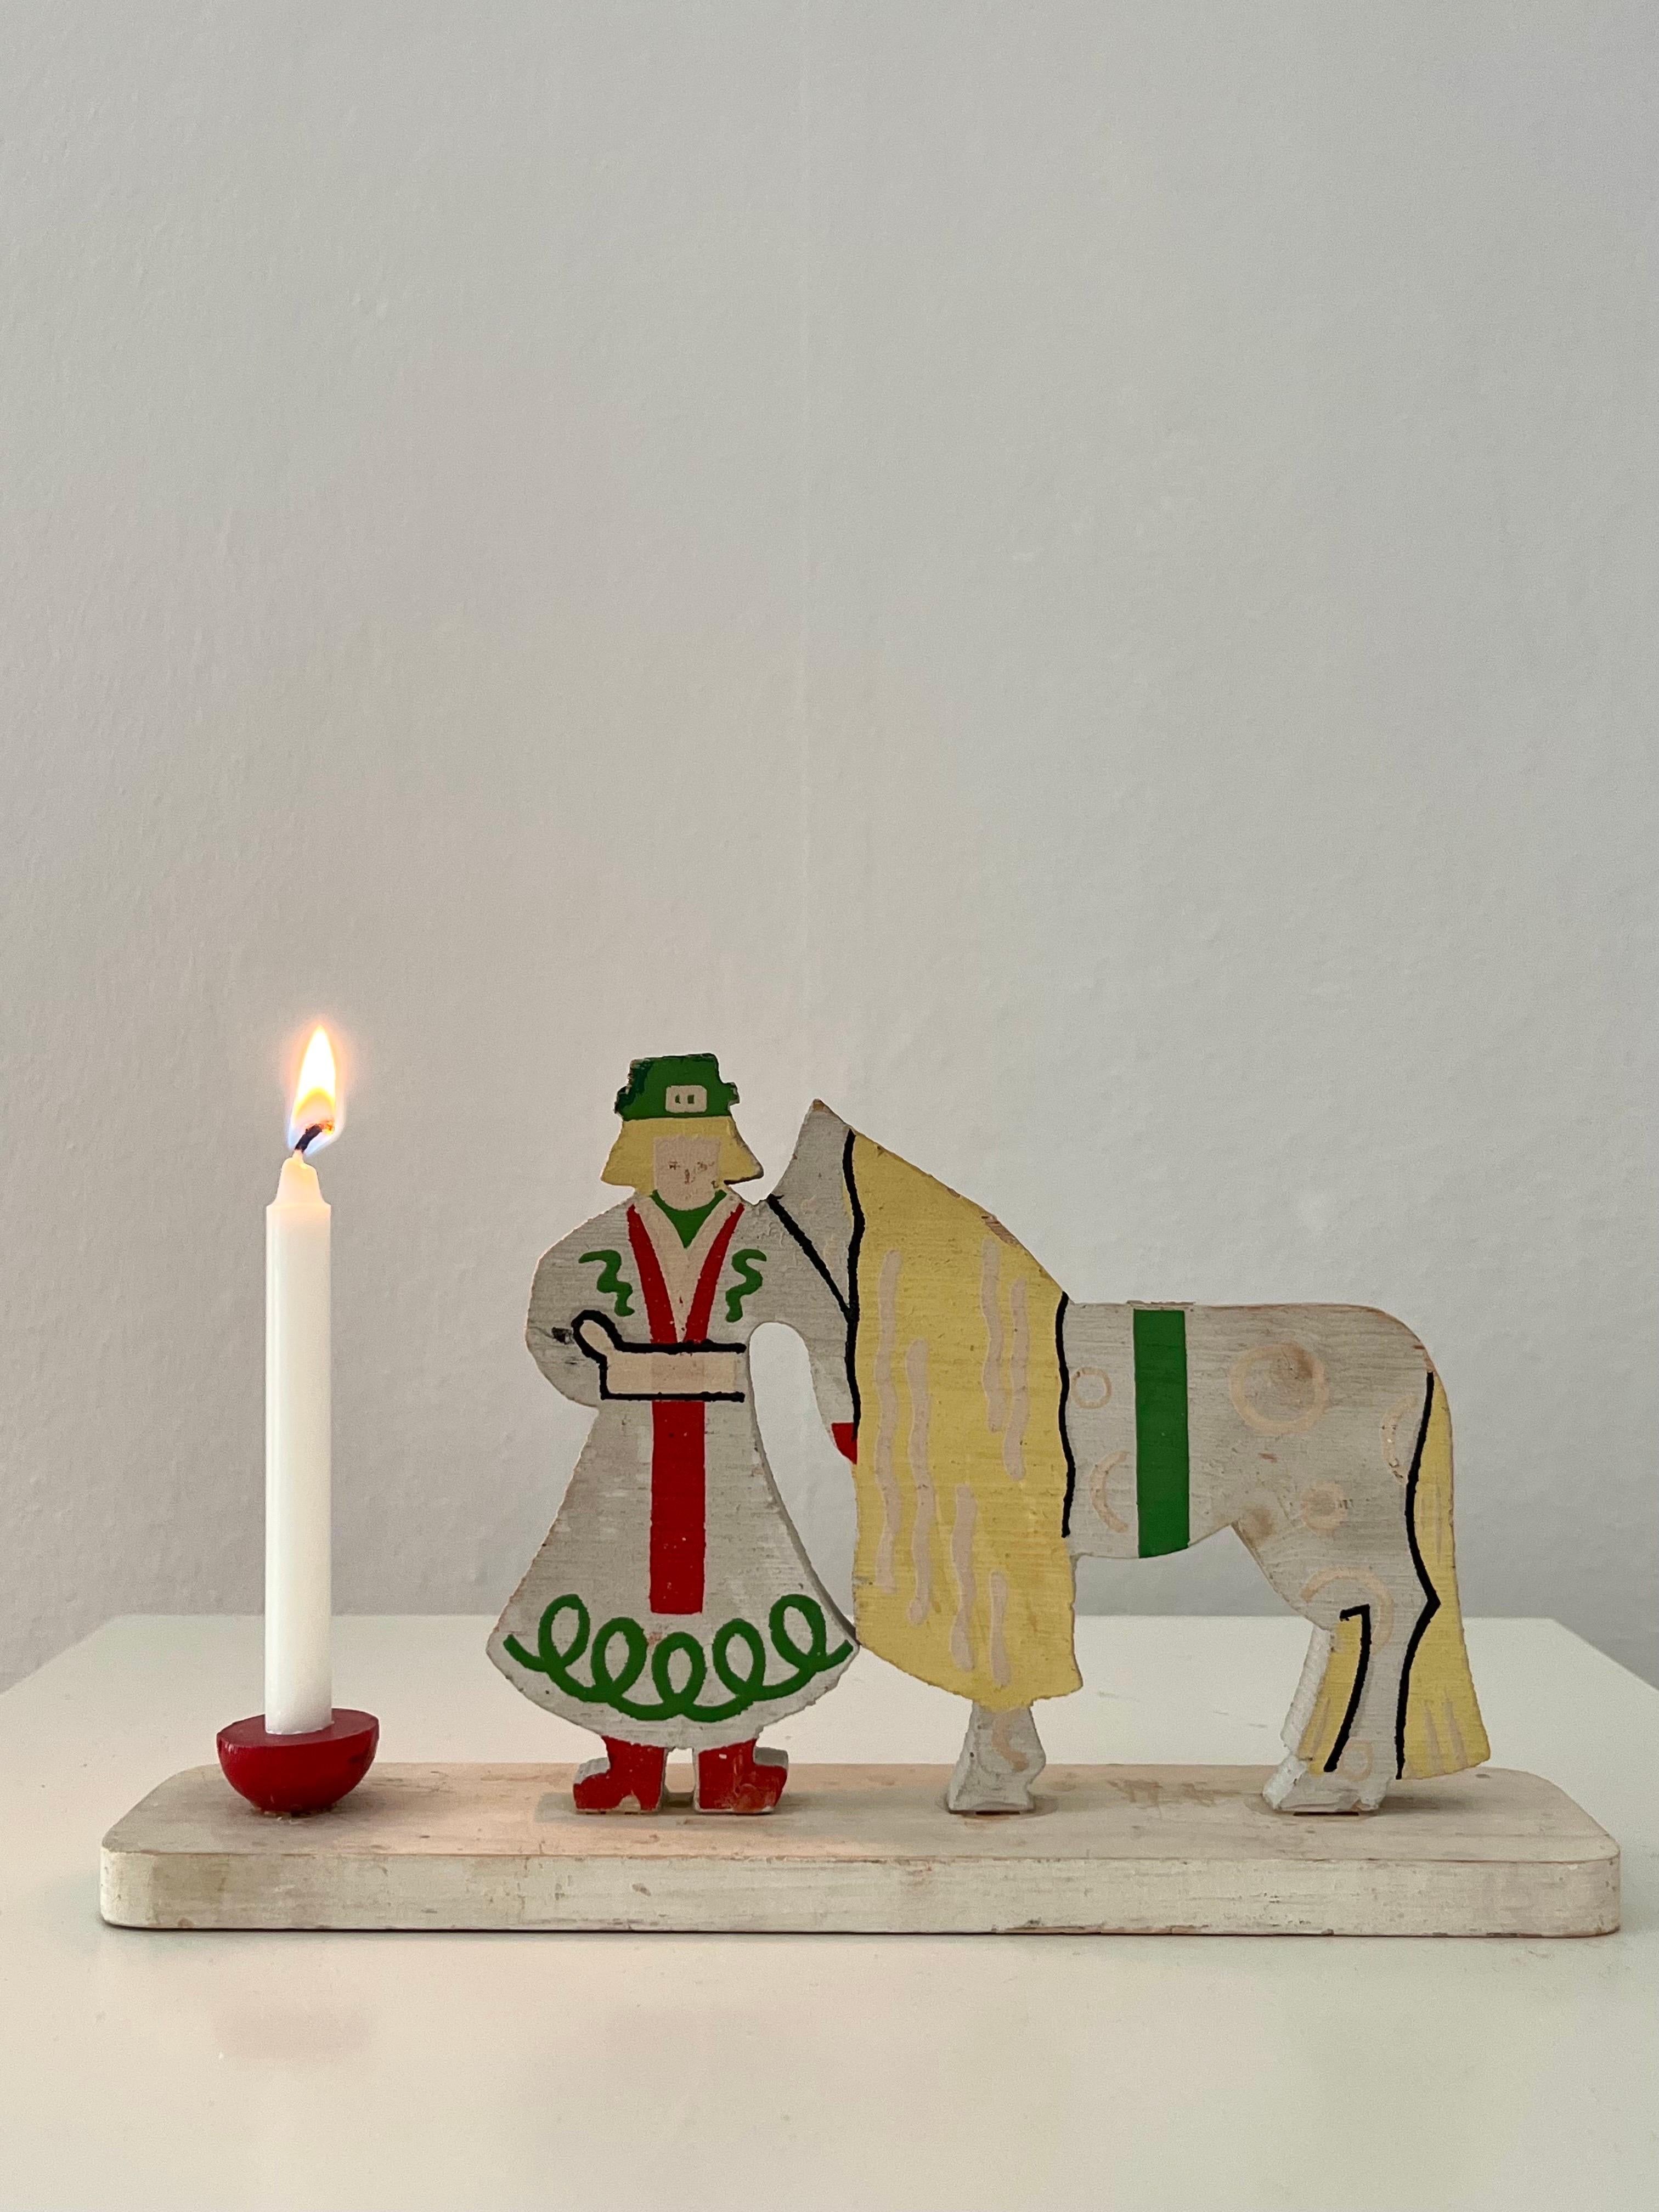 Understated, yet significant Christmas candle holder from Sweden in the 1950s/1960s. On a wood base is a wooden carving depicting a woman and a horse painted in green, red, yellow and black on a white base. In on end is a red candle holder. 